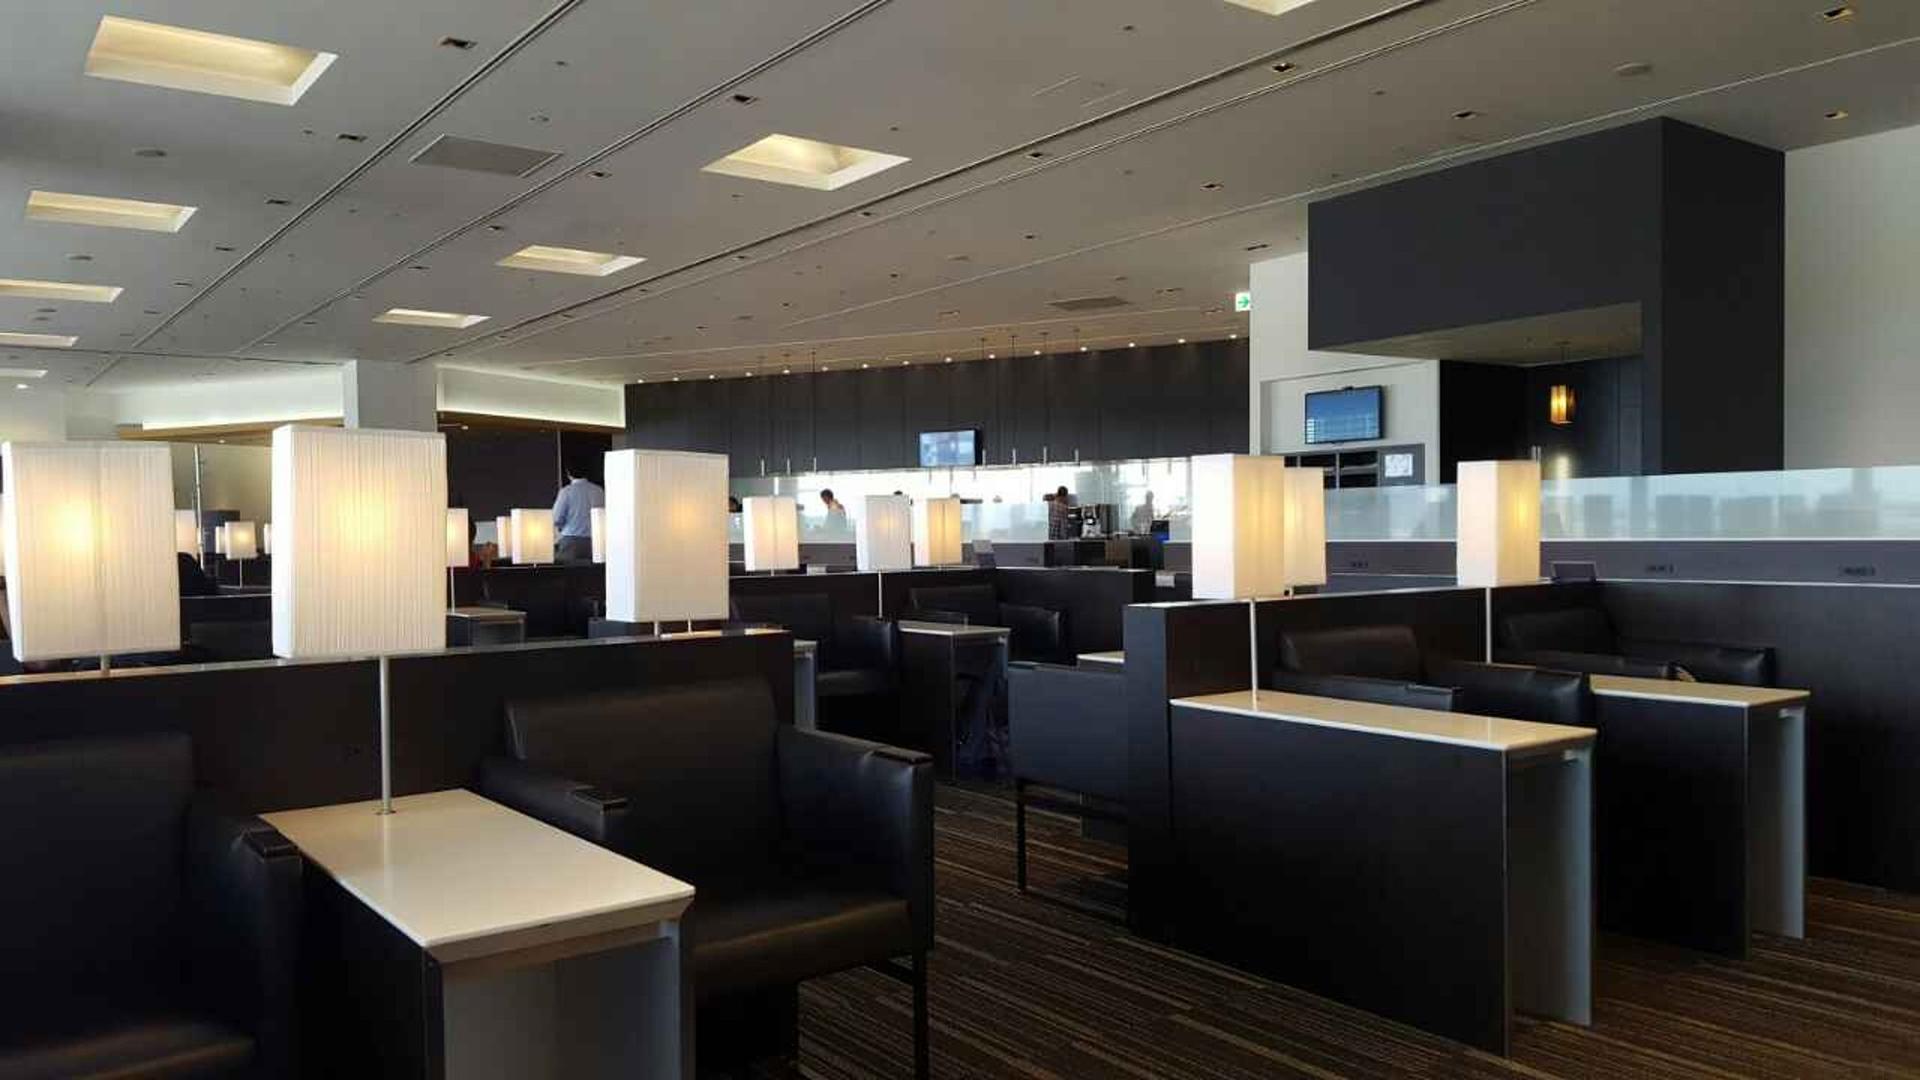 All Nippon Airways ANA Lounge image 1 of 39